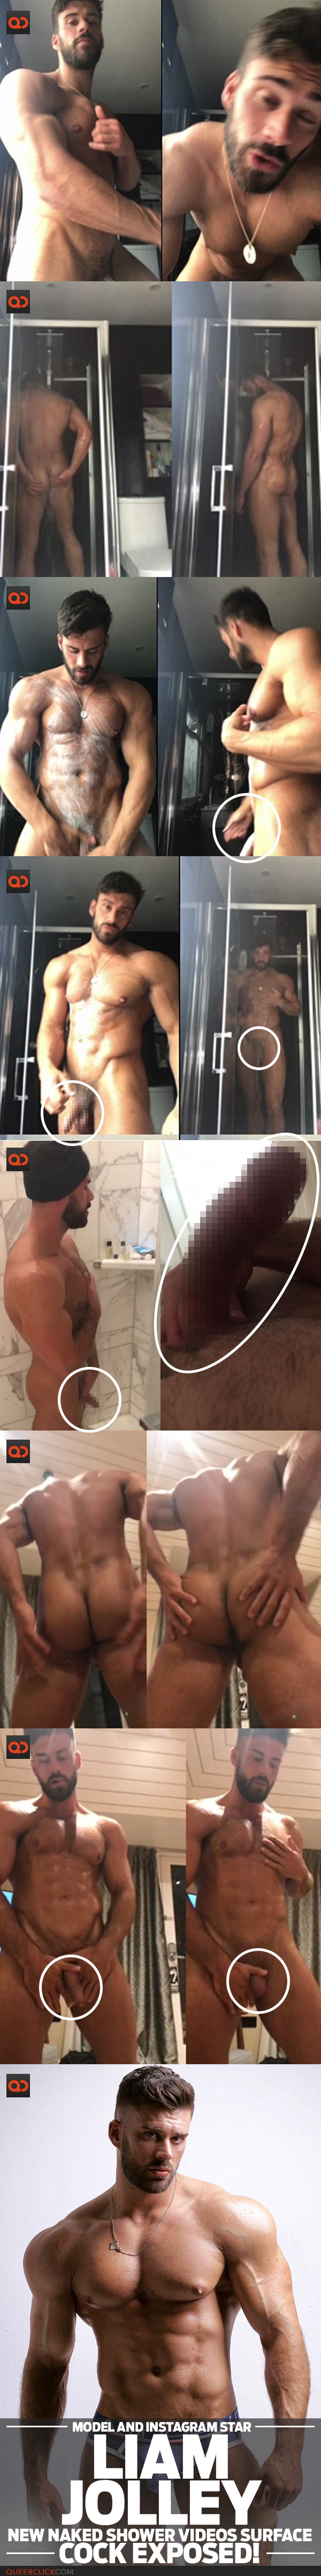 Liam Jolley, Model And Instagram Star, New Naked Shower Videos Surface - Cock Exposed!